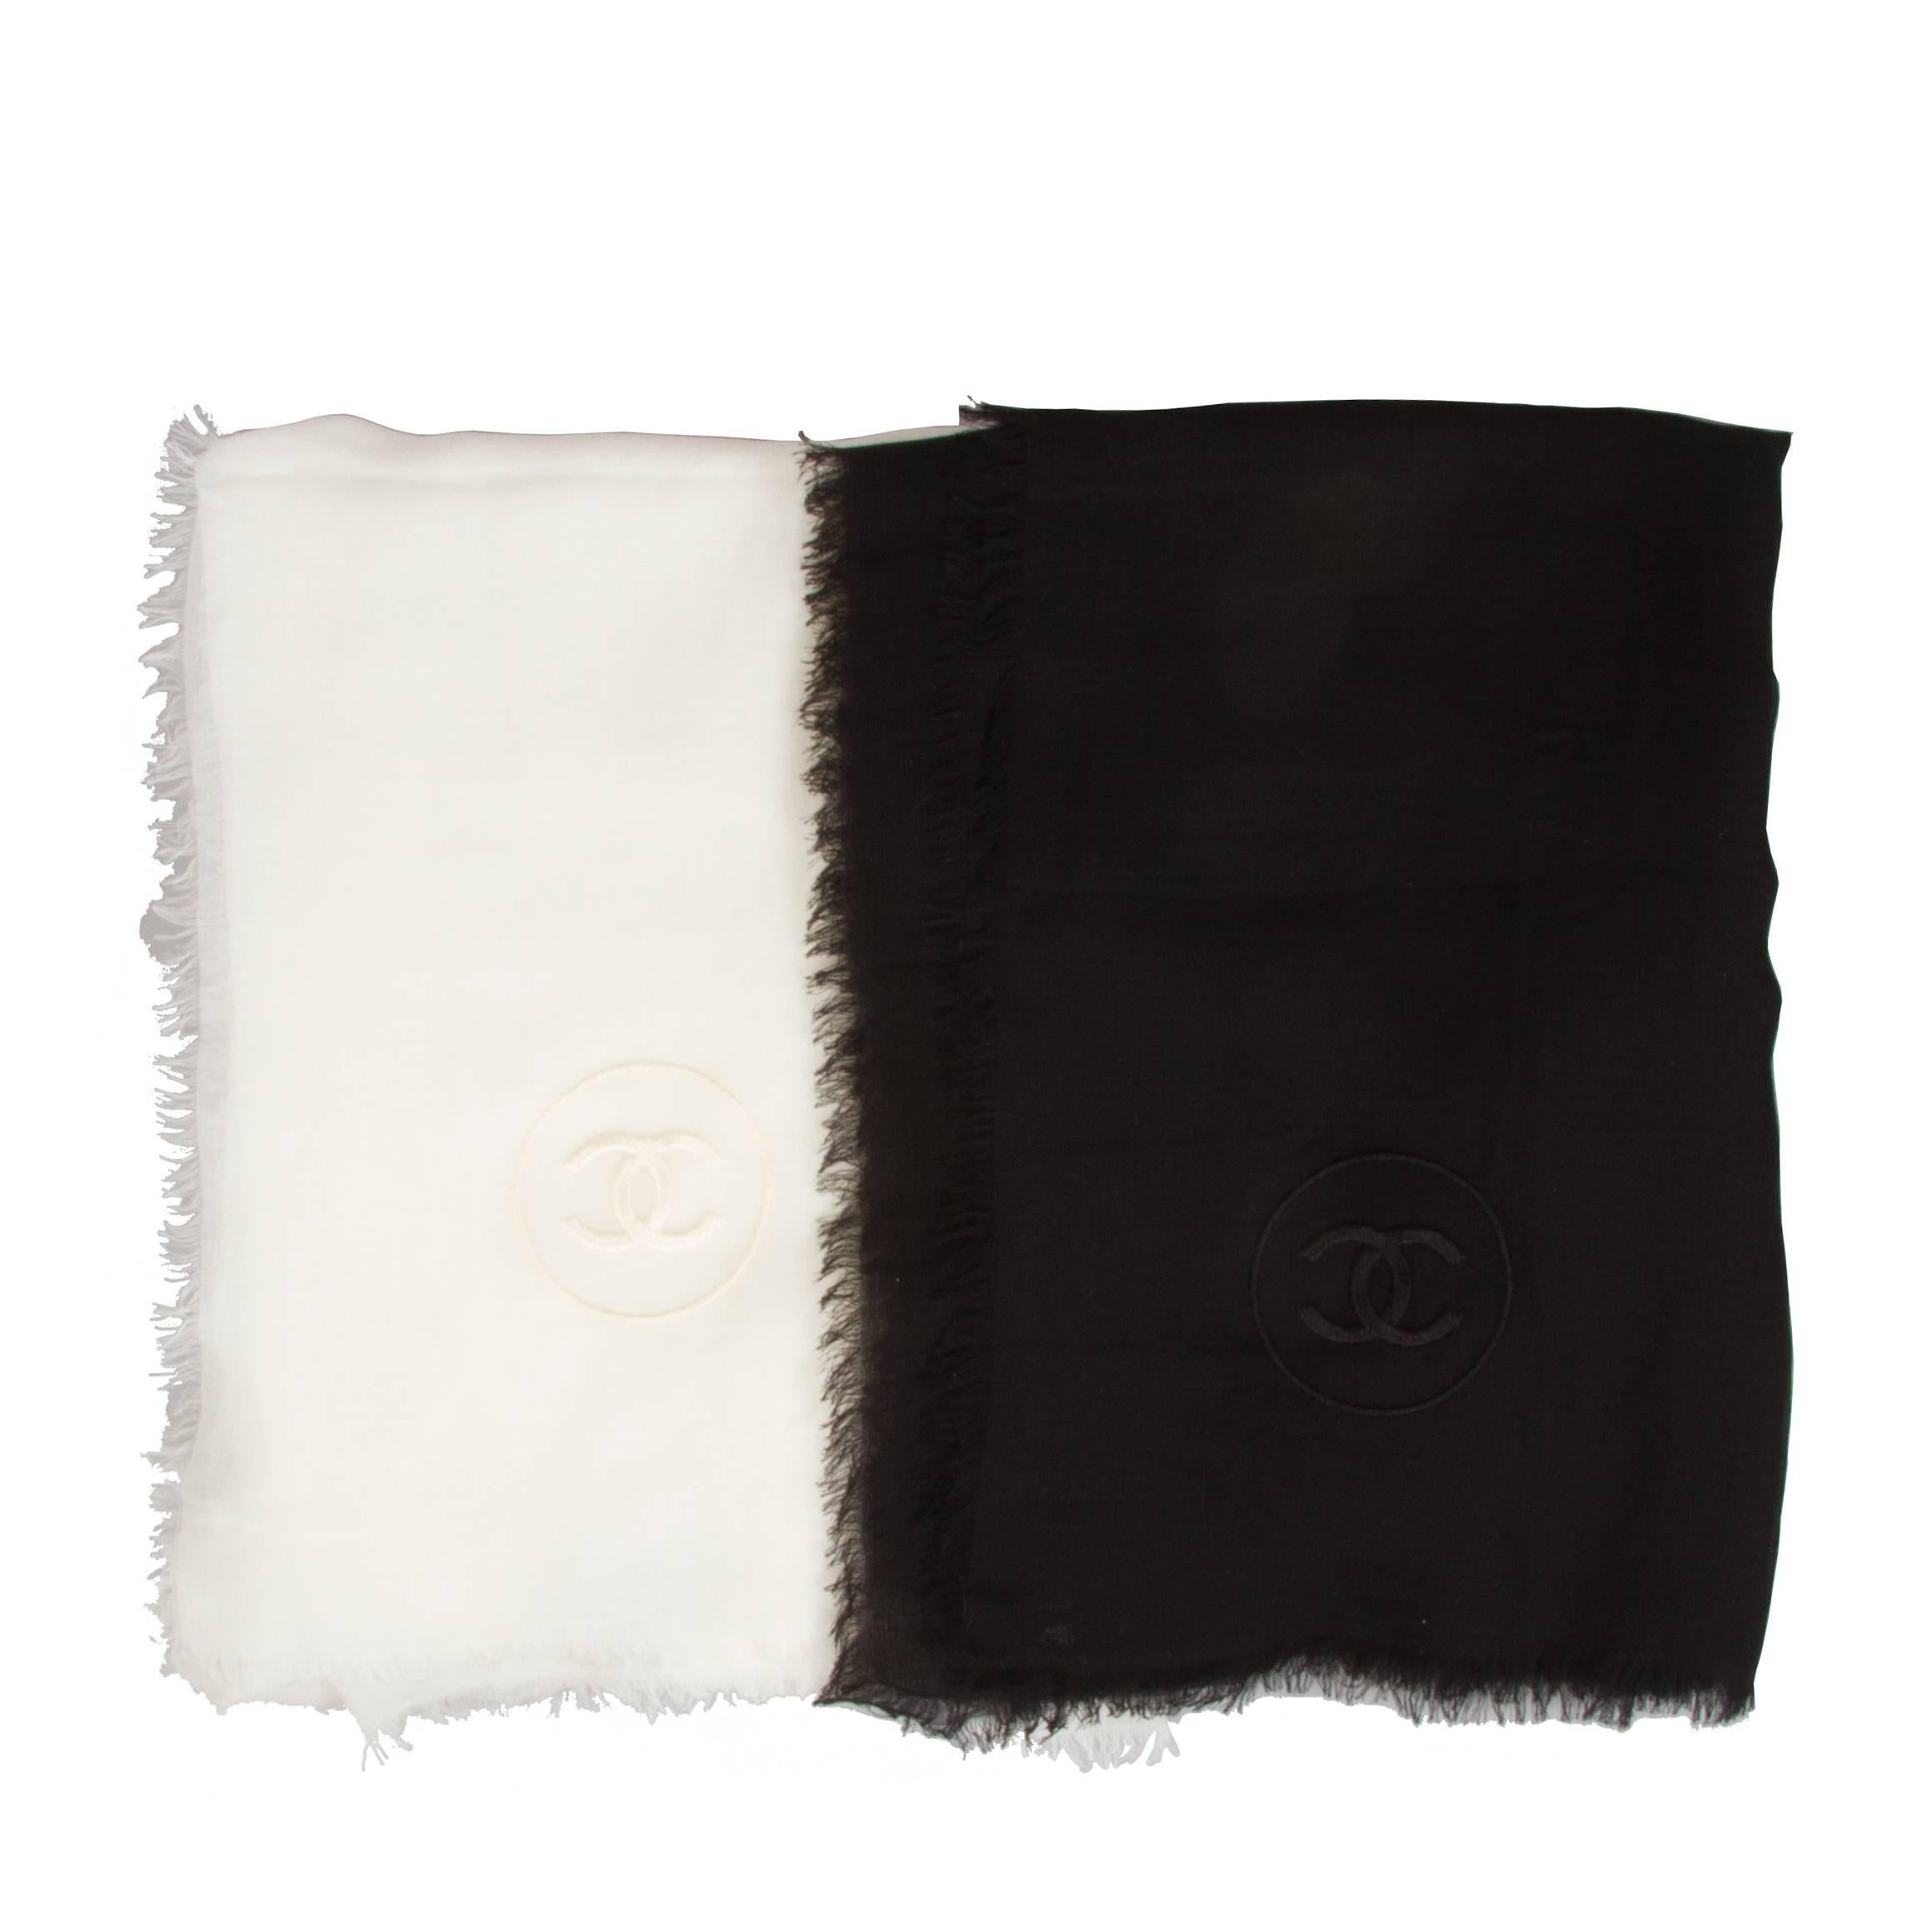 Pair of CHANEL Scarves  from the Christmas 2009 Collection